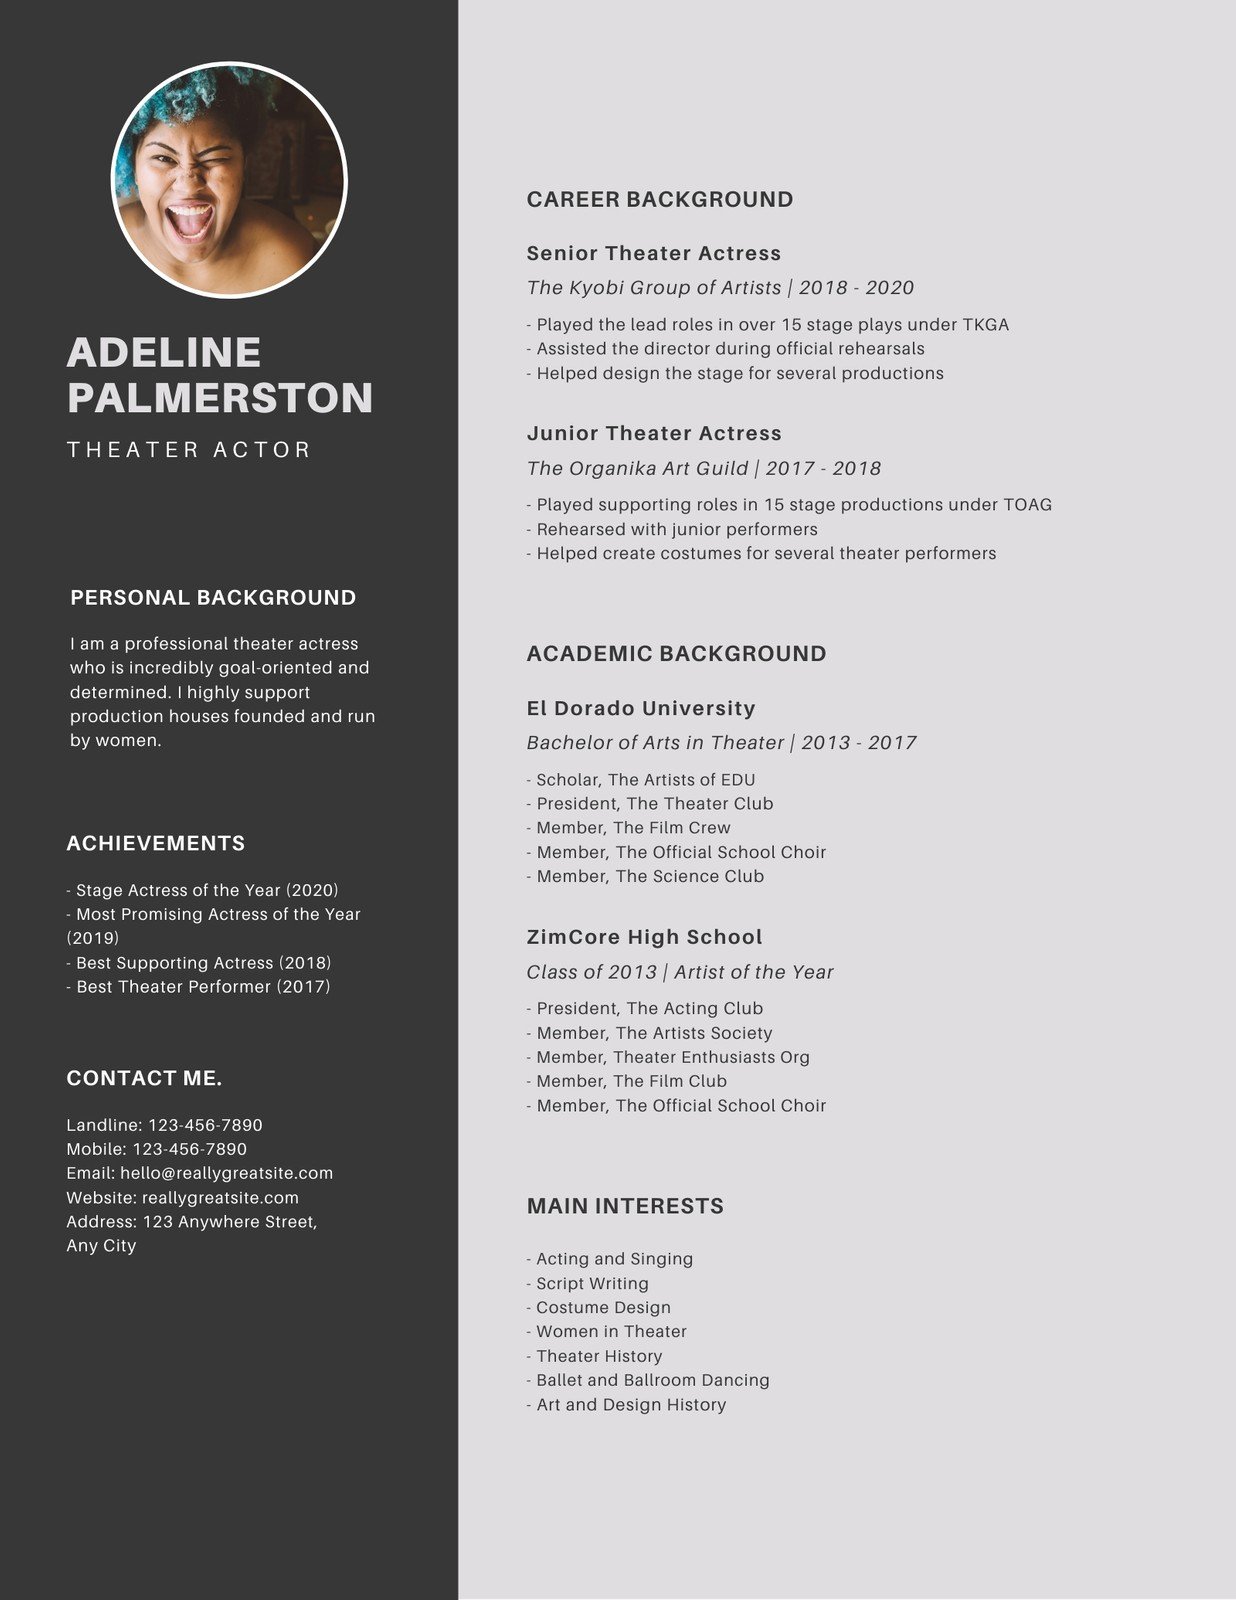 Customize 22+ Acting Resumes Templates Online - Canva Throughout Theatrical Resume Template Word